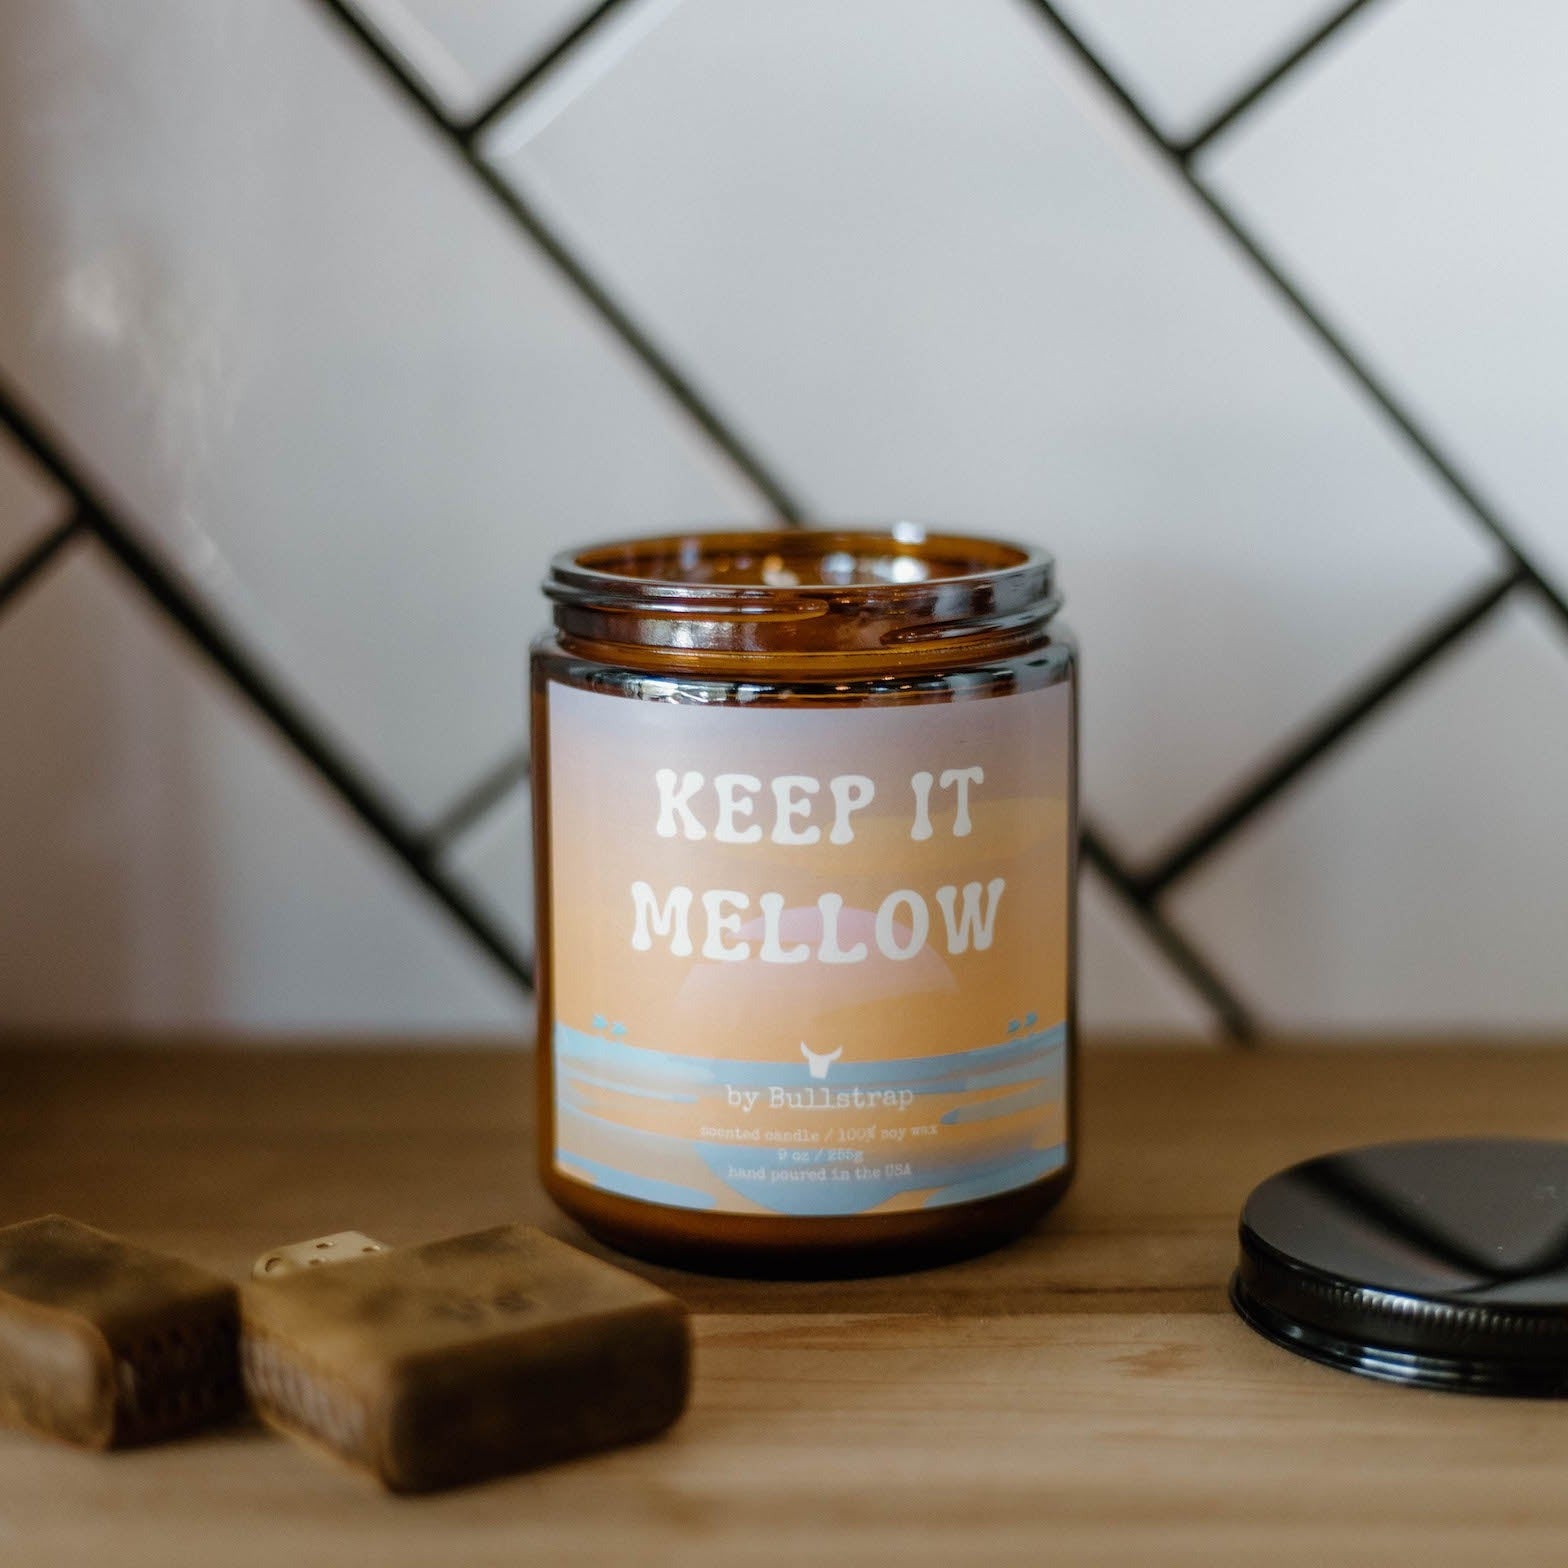 Keep It Mellow Candle (9 Ounce)